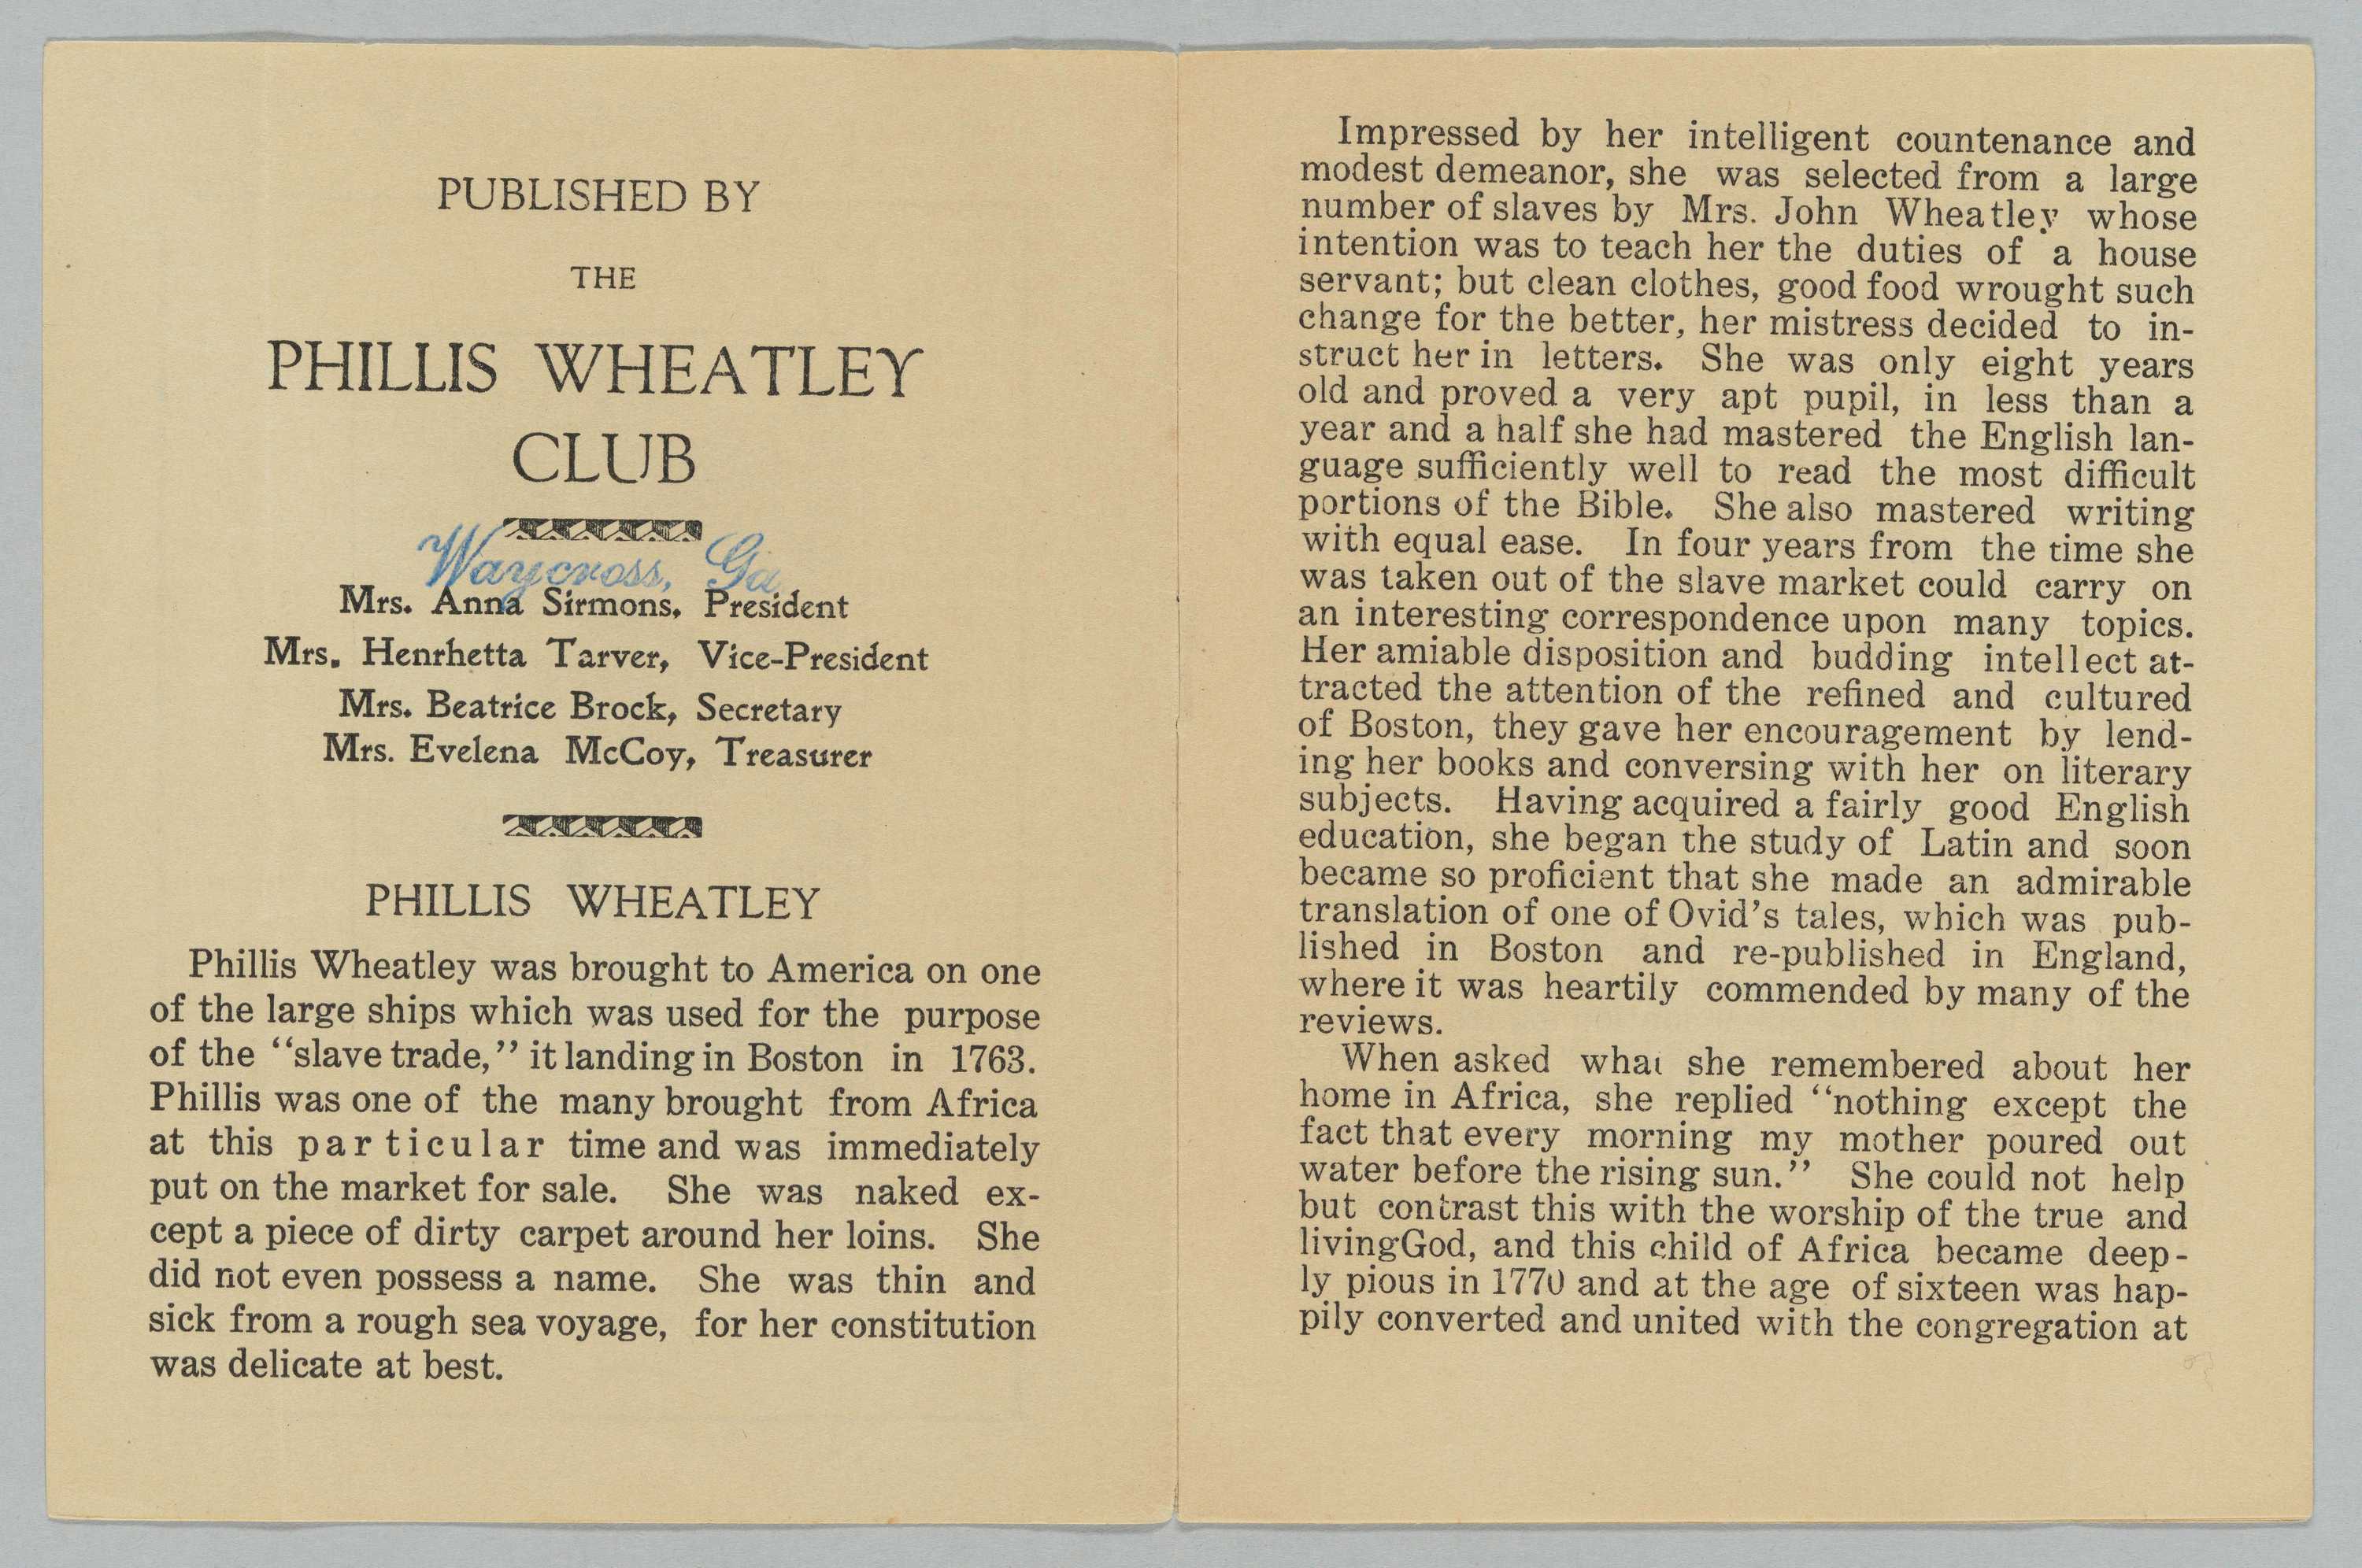 Inside cover page of Phillis Wheatley Club of Waycross Georgia booklet